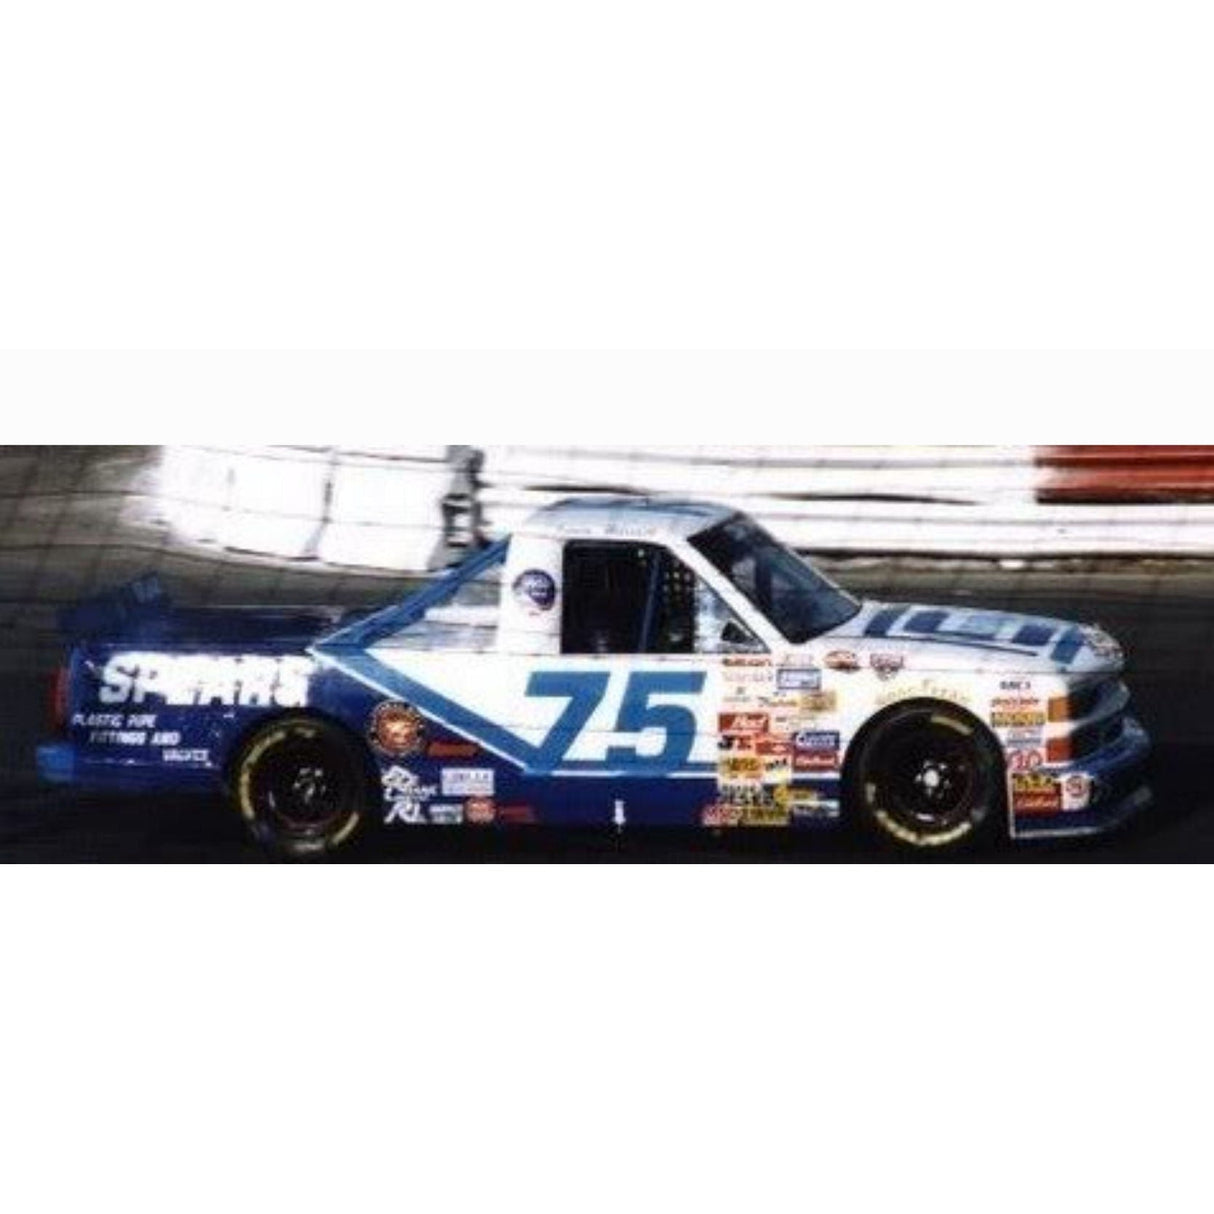 JH Designs Kevin Harvick 1998 TRUCK #75 Spears 1:64 Racecar Decal Set